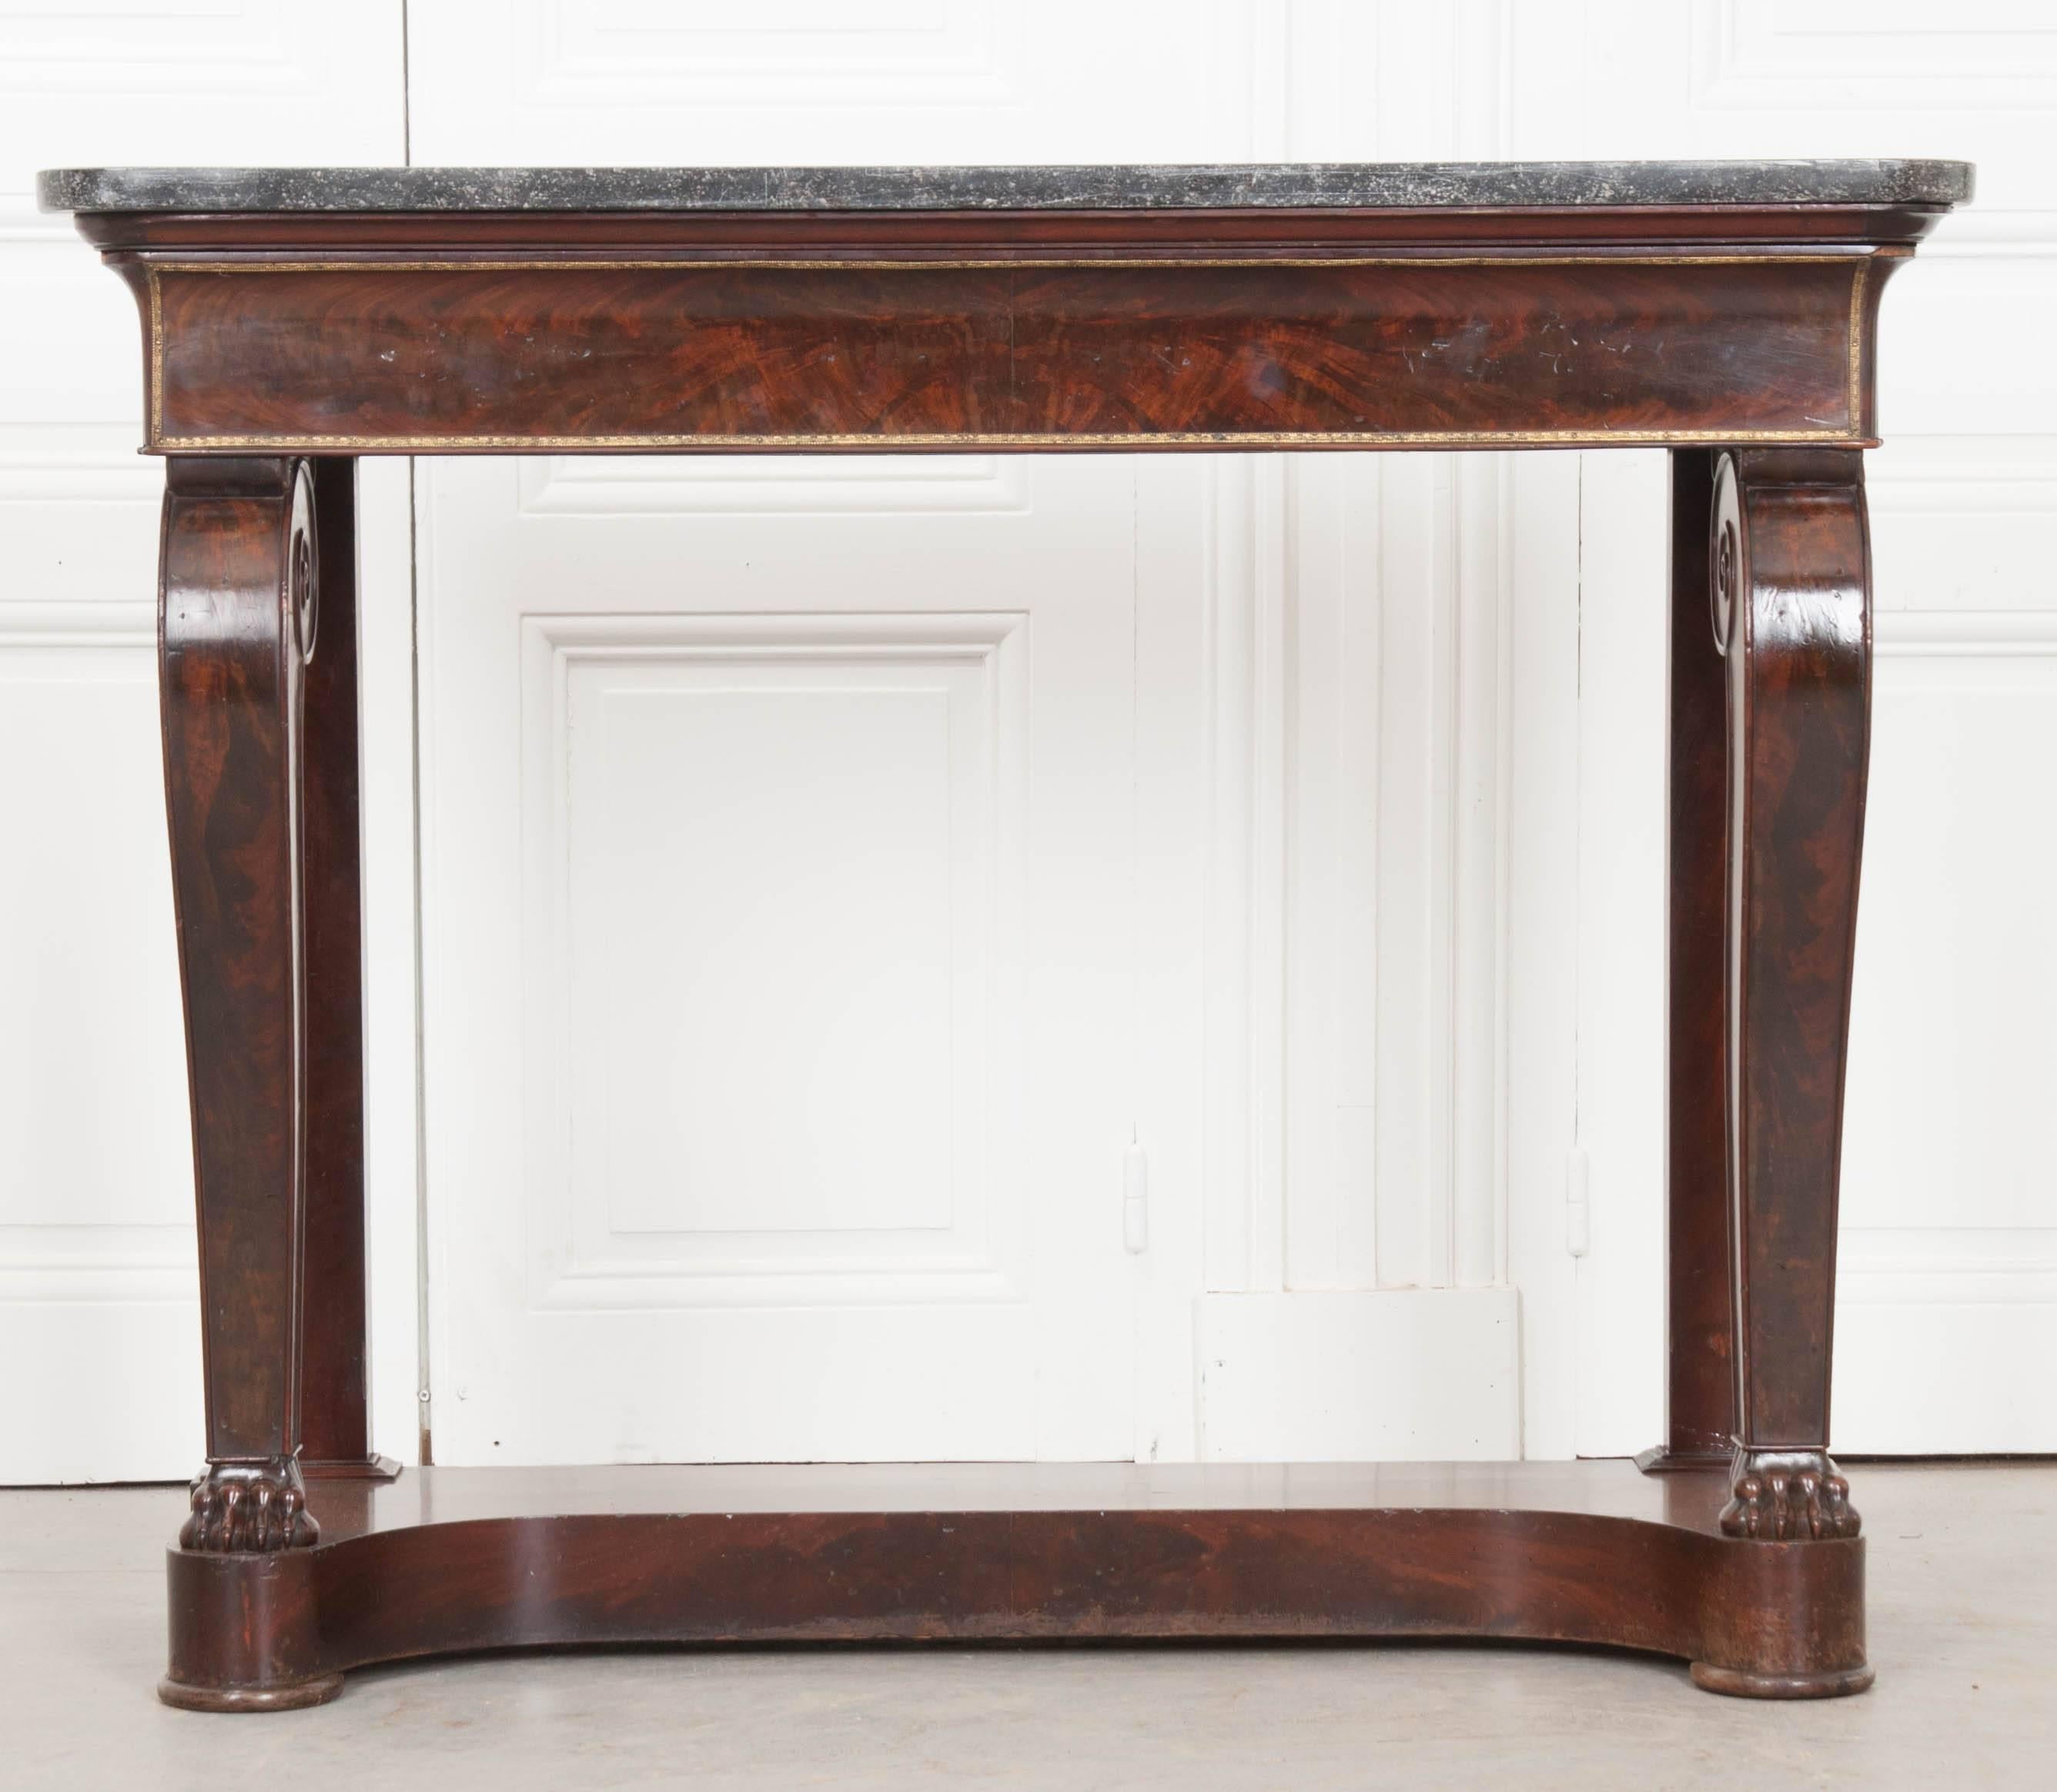 A handsome French console made in the Restauration style with a black fossil marble top. The marble top has rounded front corners, wonderful fossilized specimens, and rests atop a large hidden drawer that also functions as the table’s apron. This